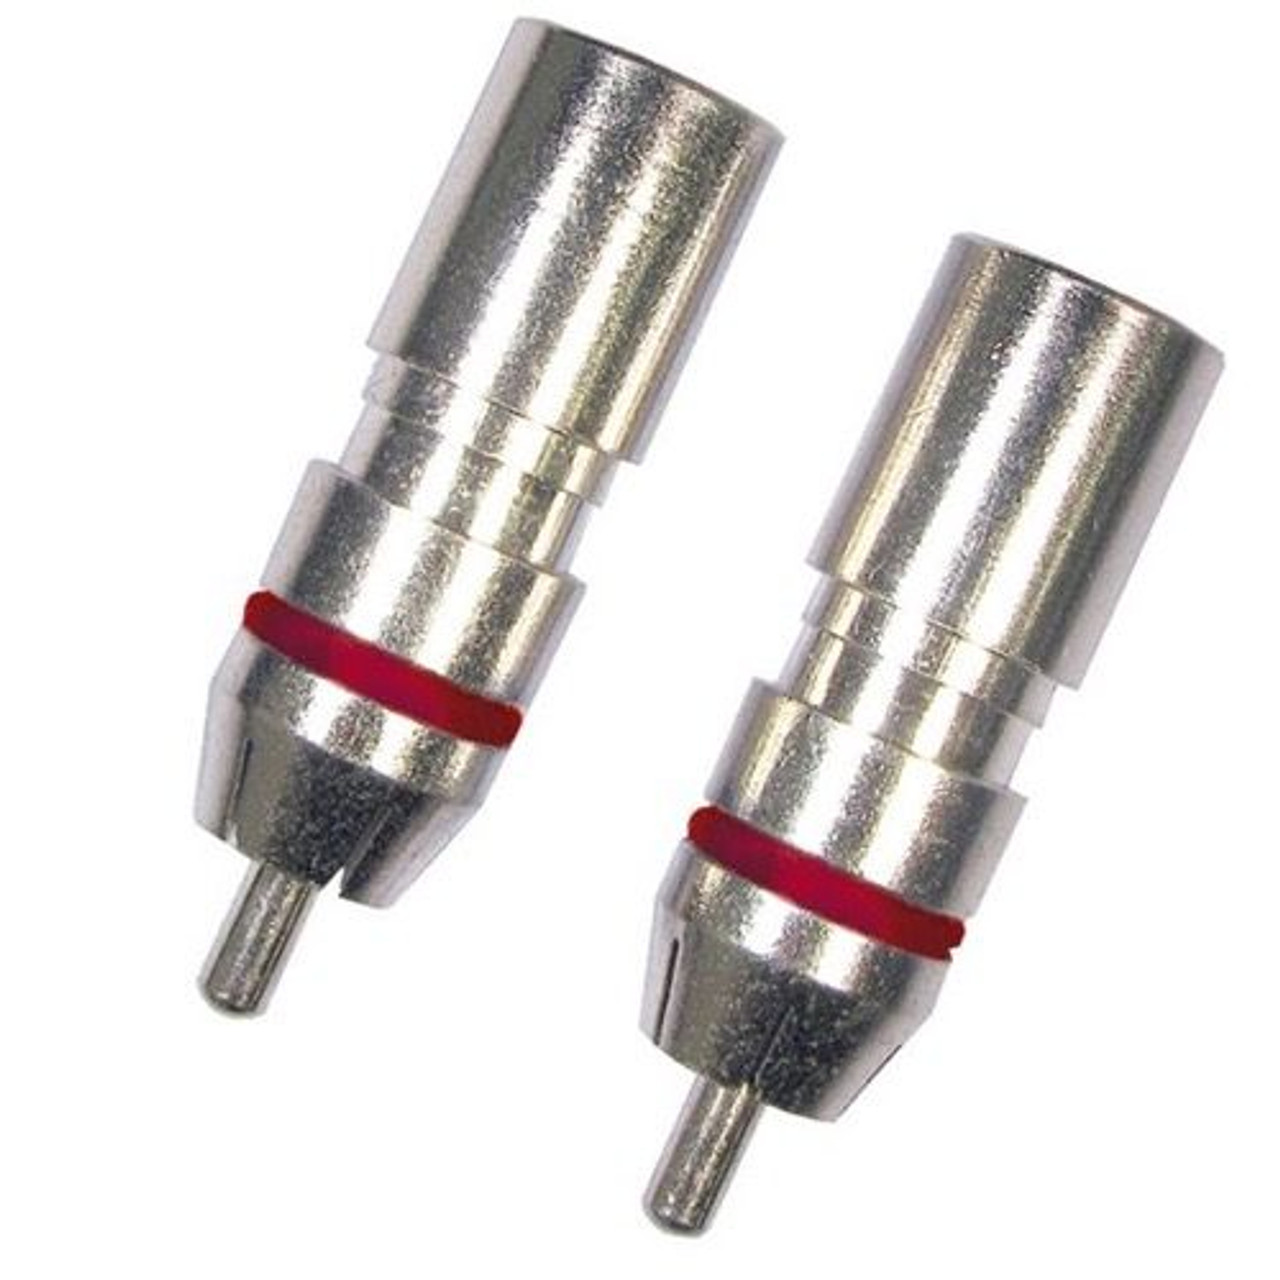 Forza 42271 RCA Compression Connector RG59 Coaxial Nickel Plate Permaseal